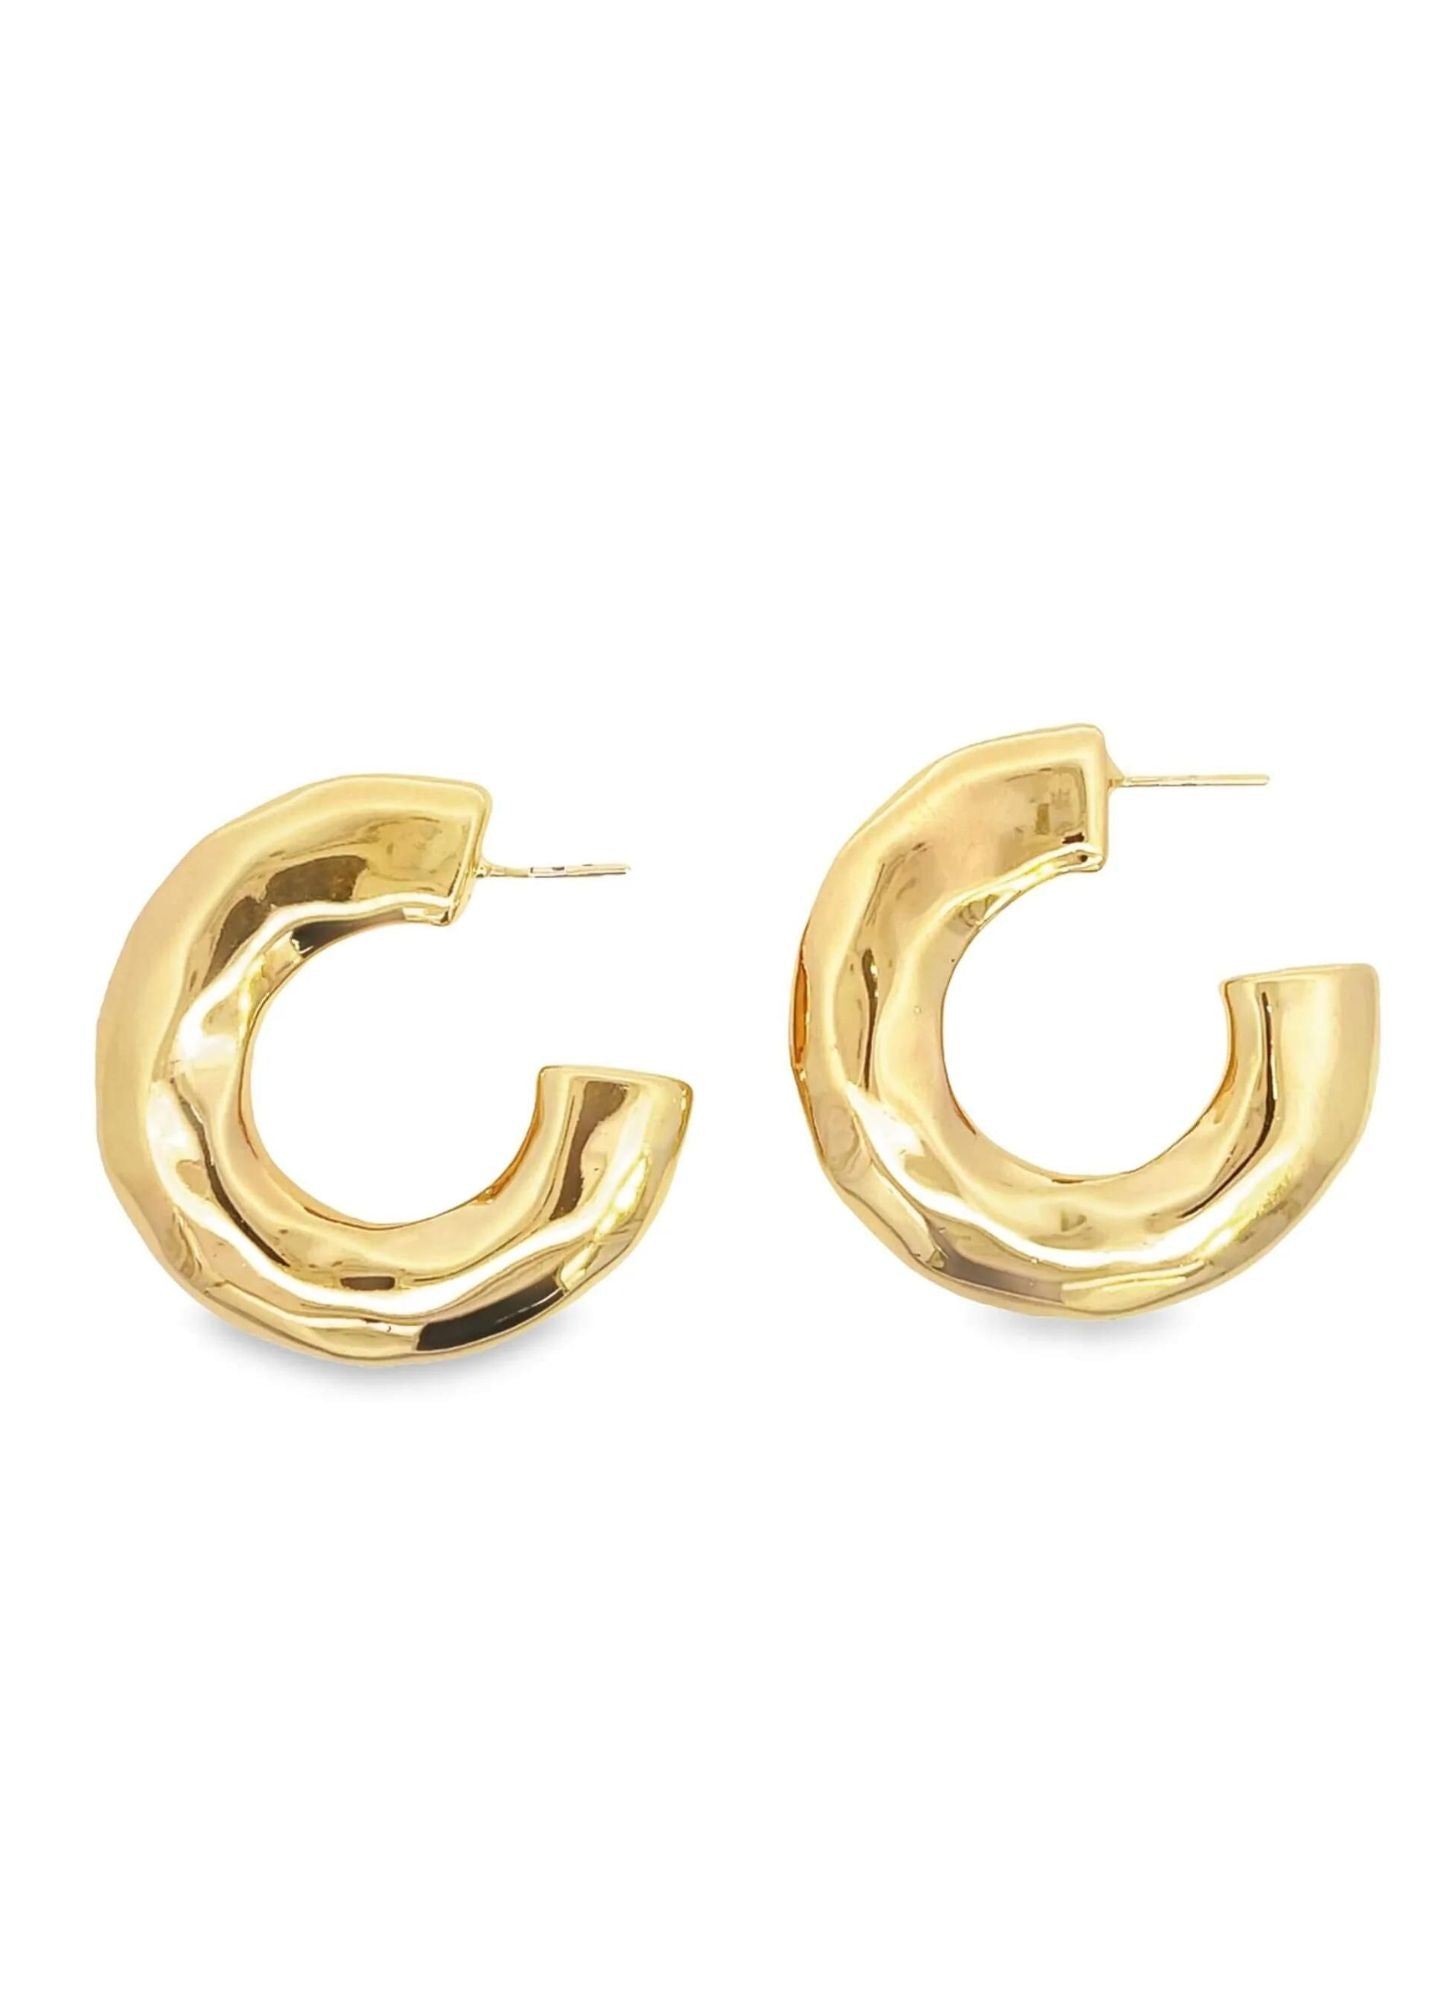 Thick Wavy 18K Gold Filled Huggie Hoops in gold or rhodium from Inaury.com